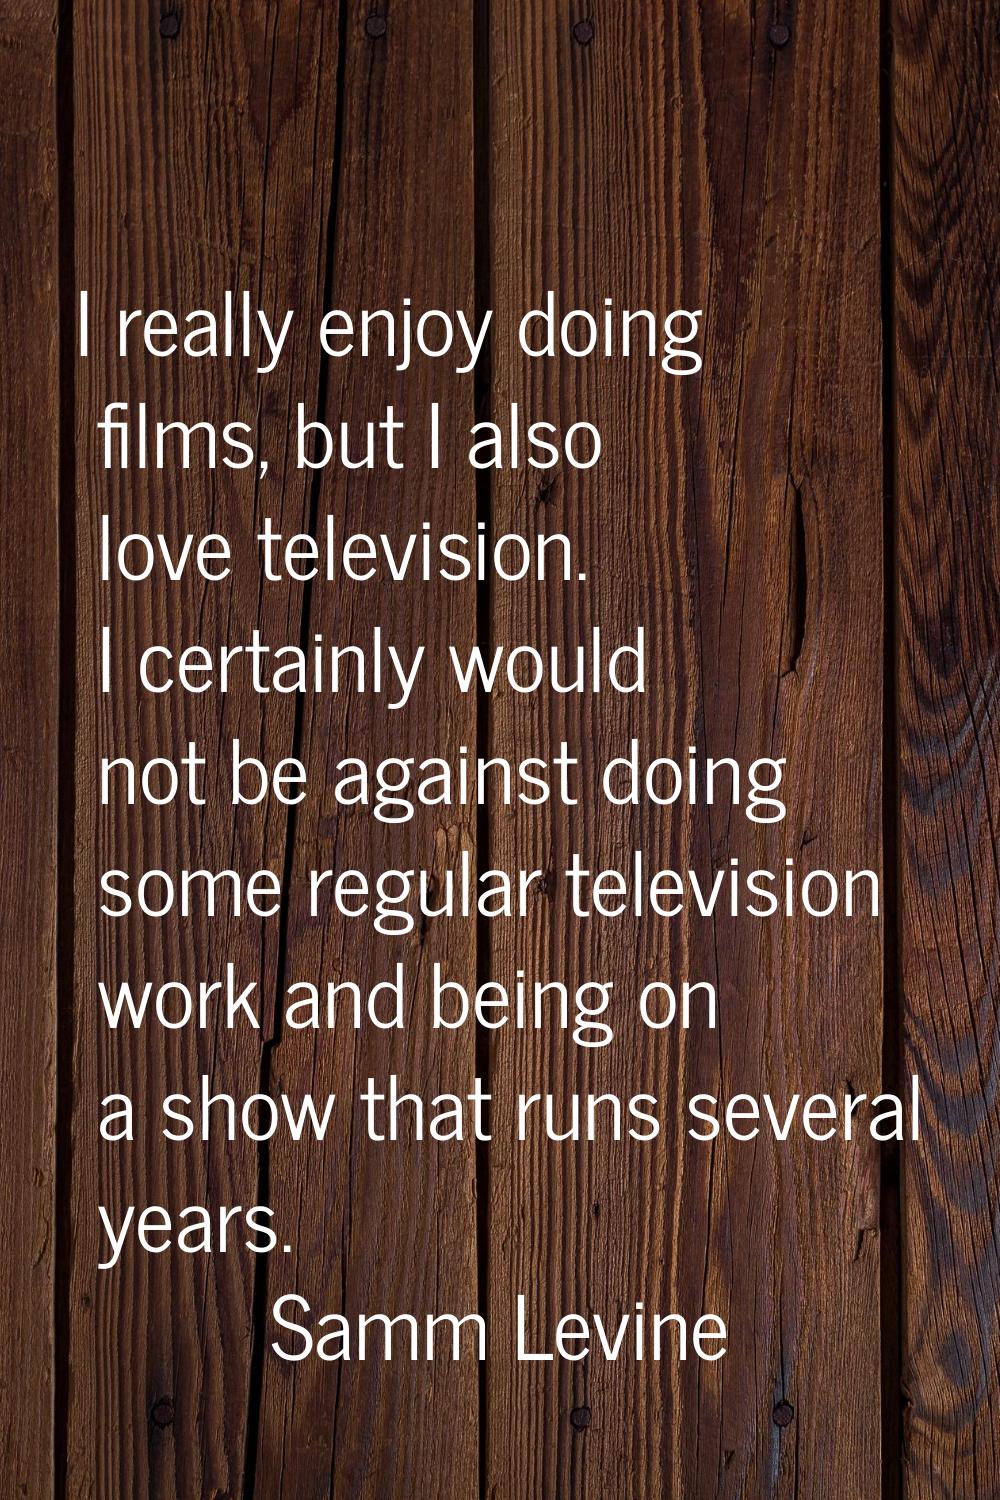 I really enjoy doing films, but I also love television. I certainly would not be against doing some